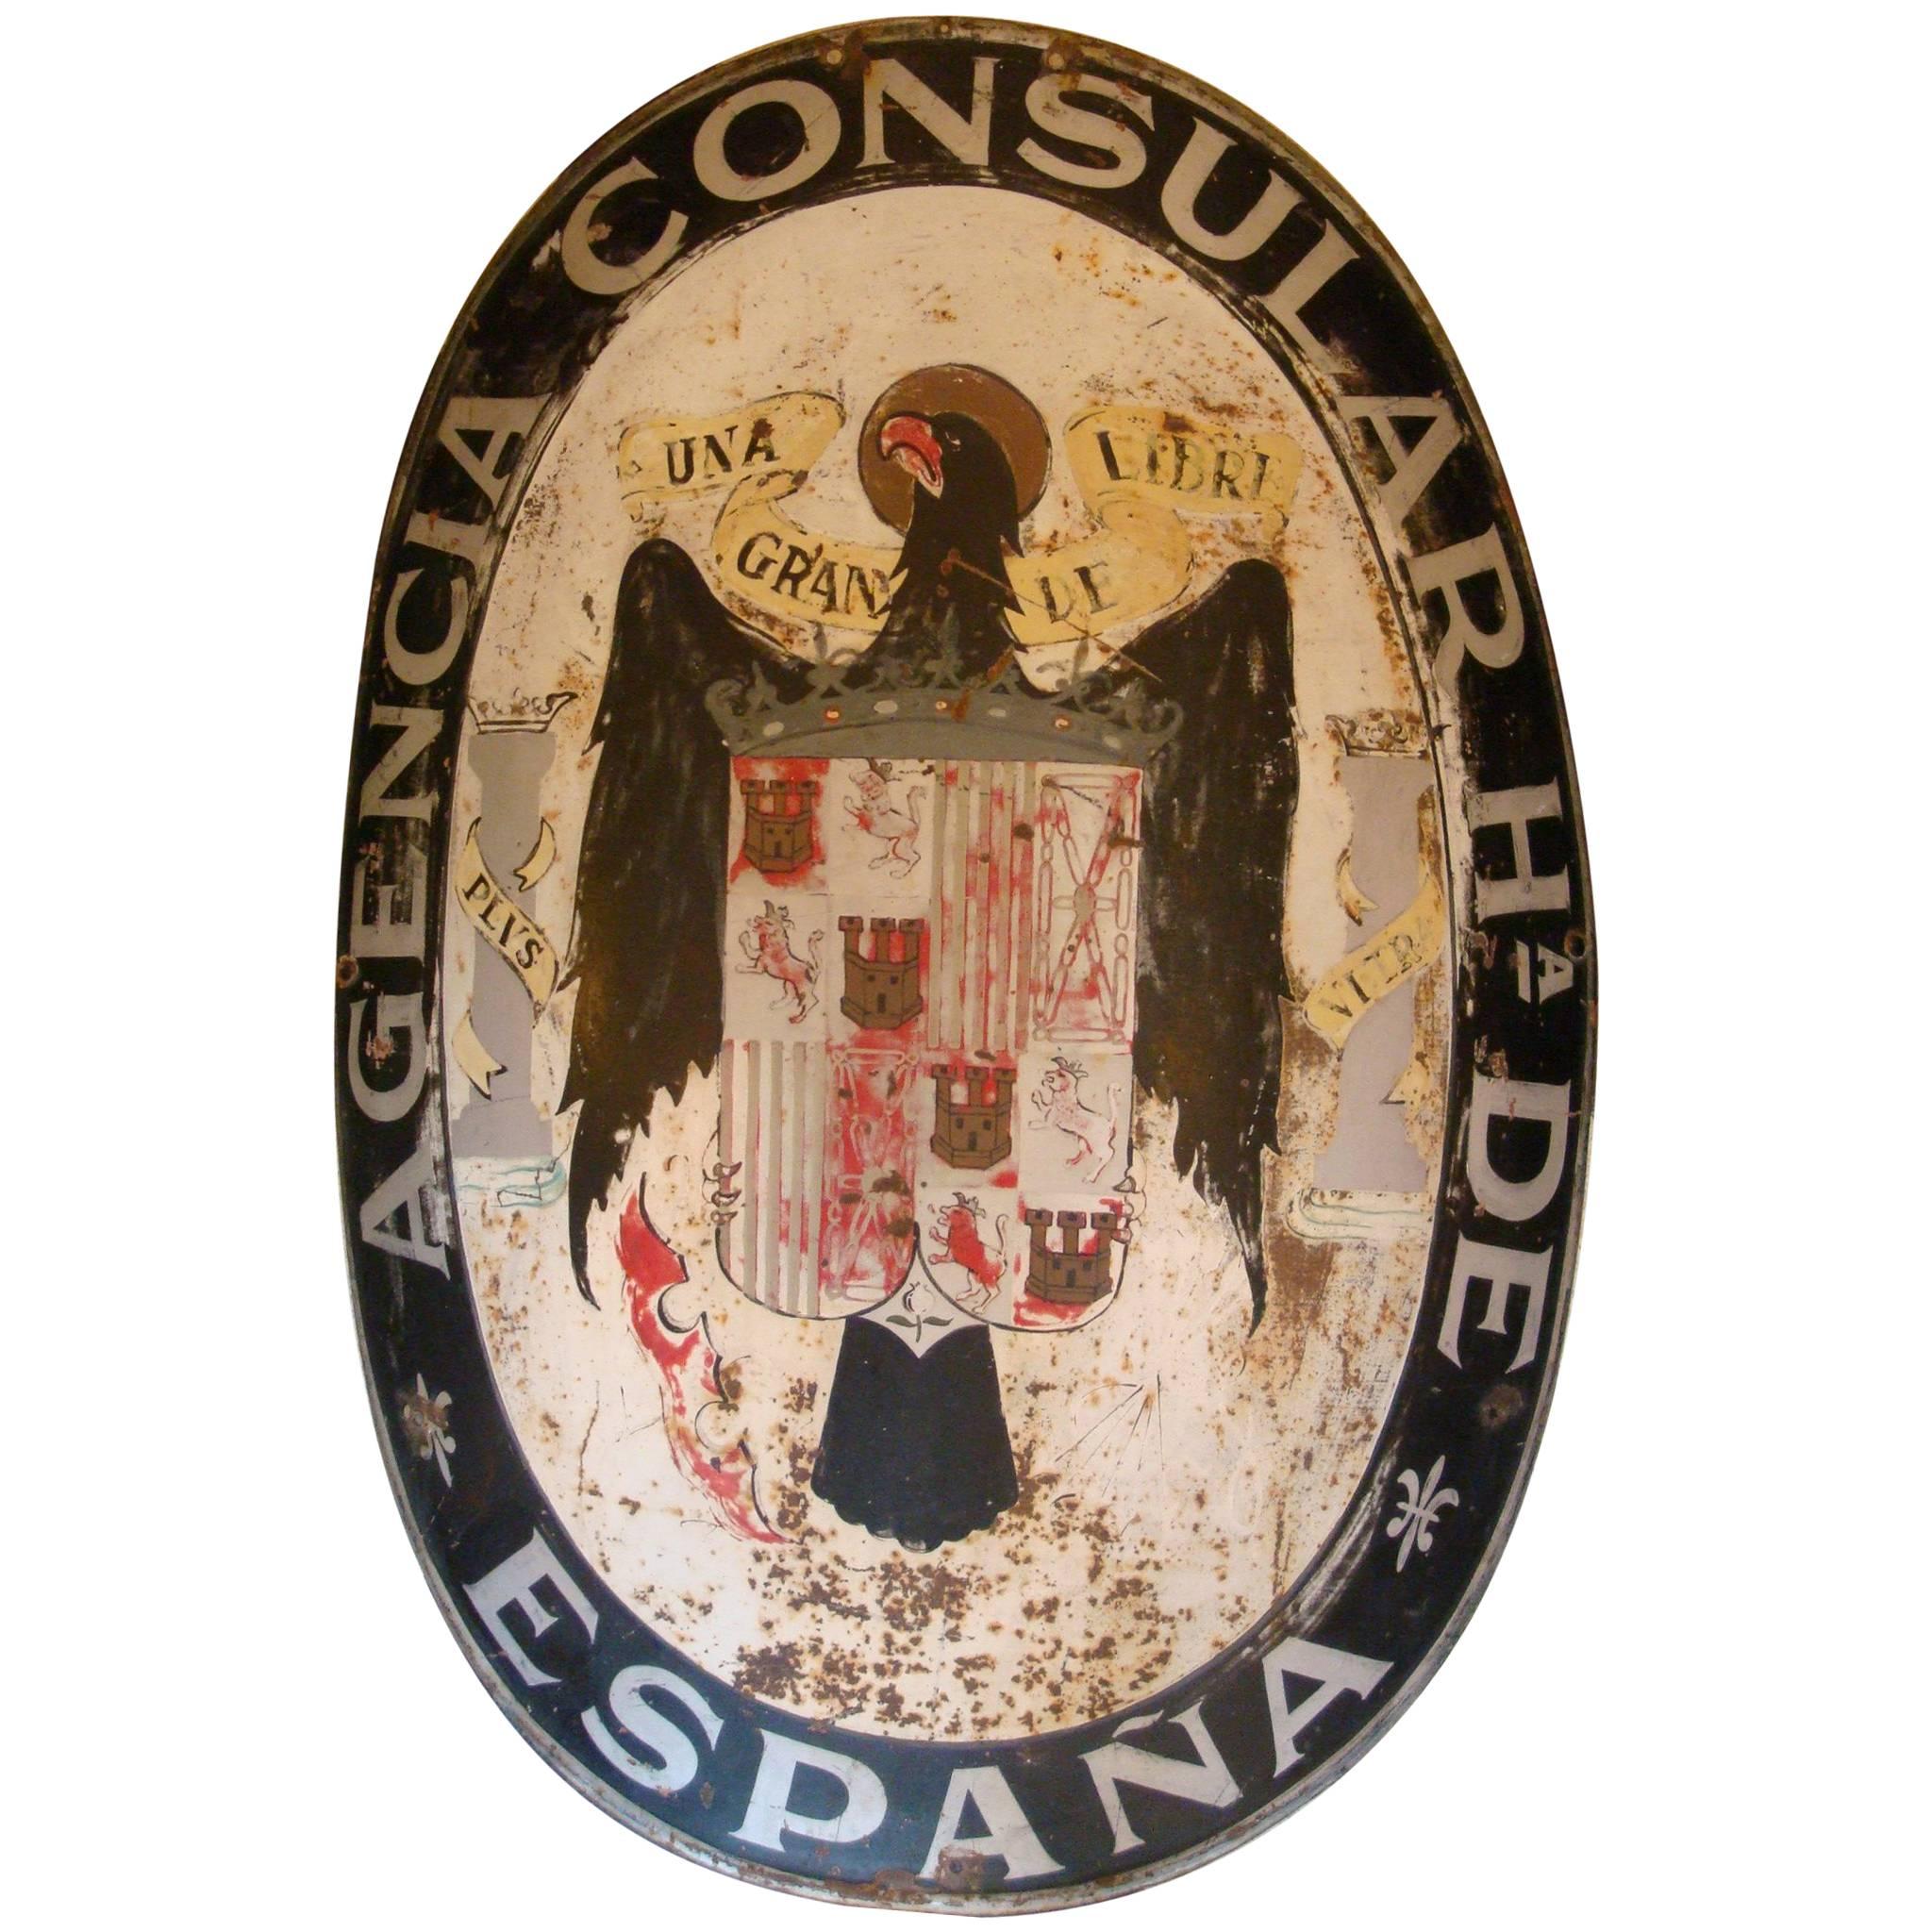 Spanish Consulate Embassy Sign with Royal Eagle, 1910-1930